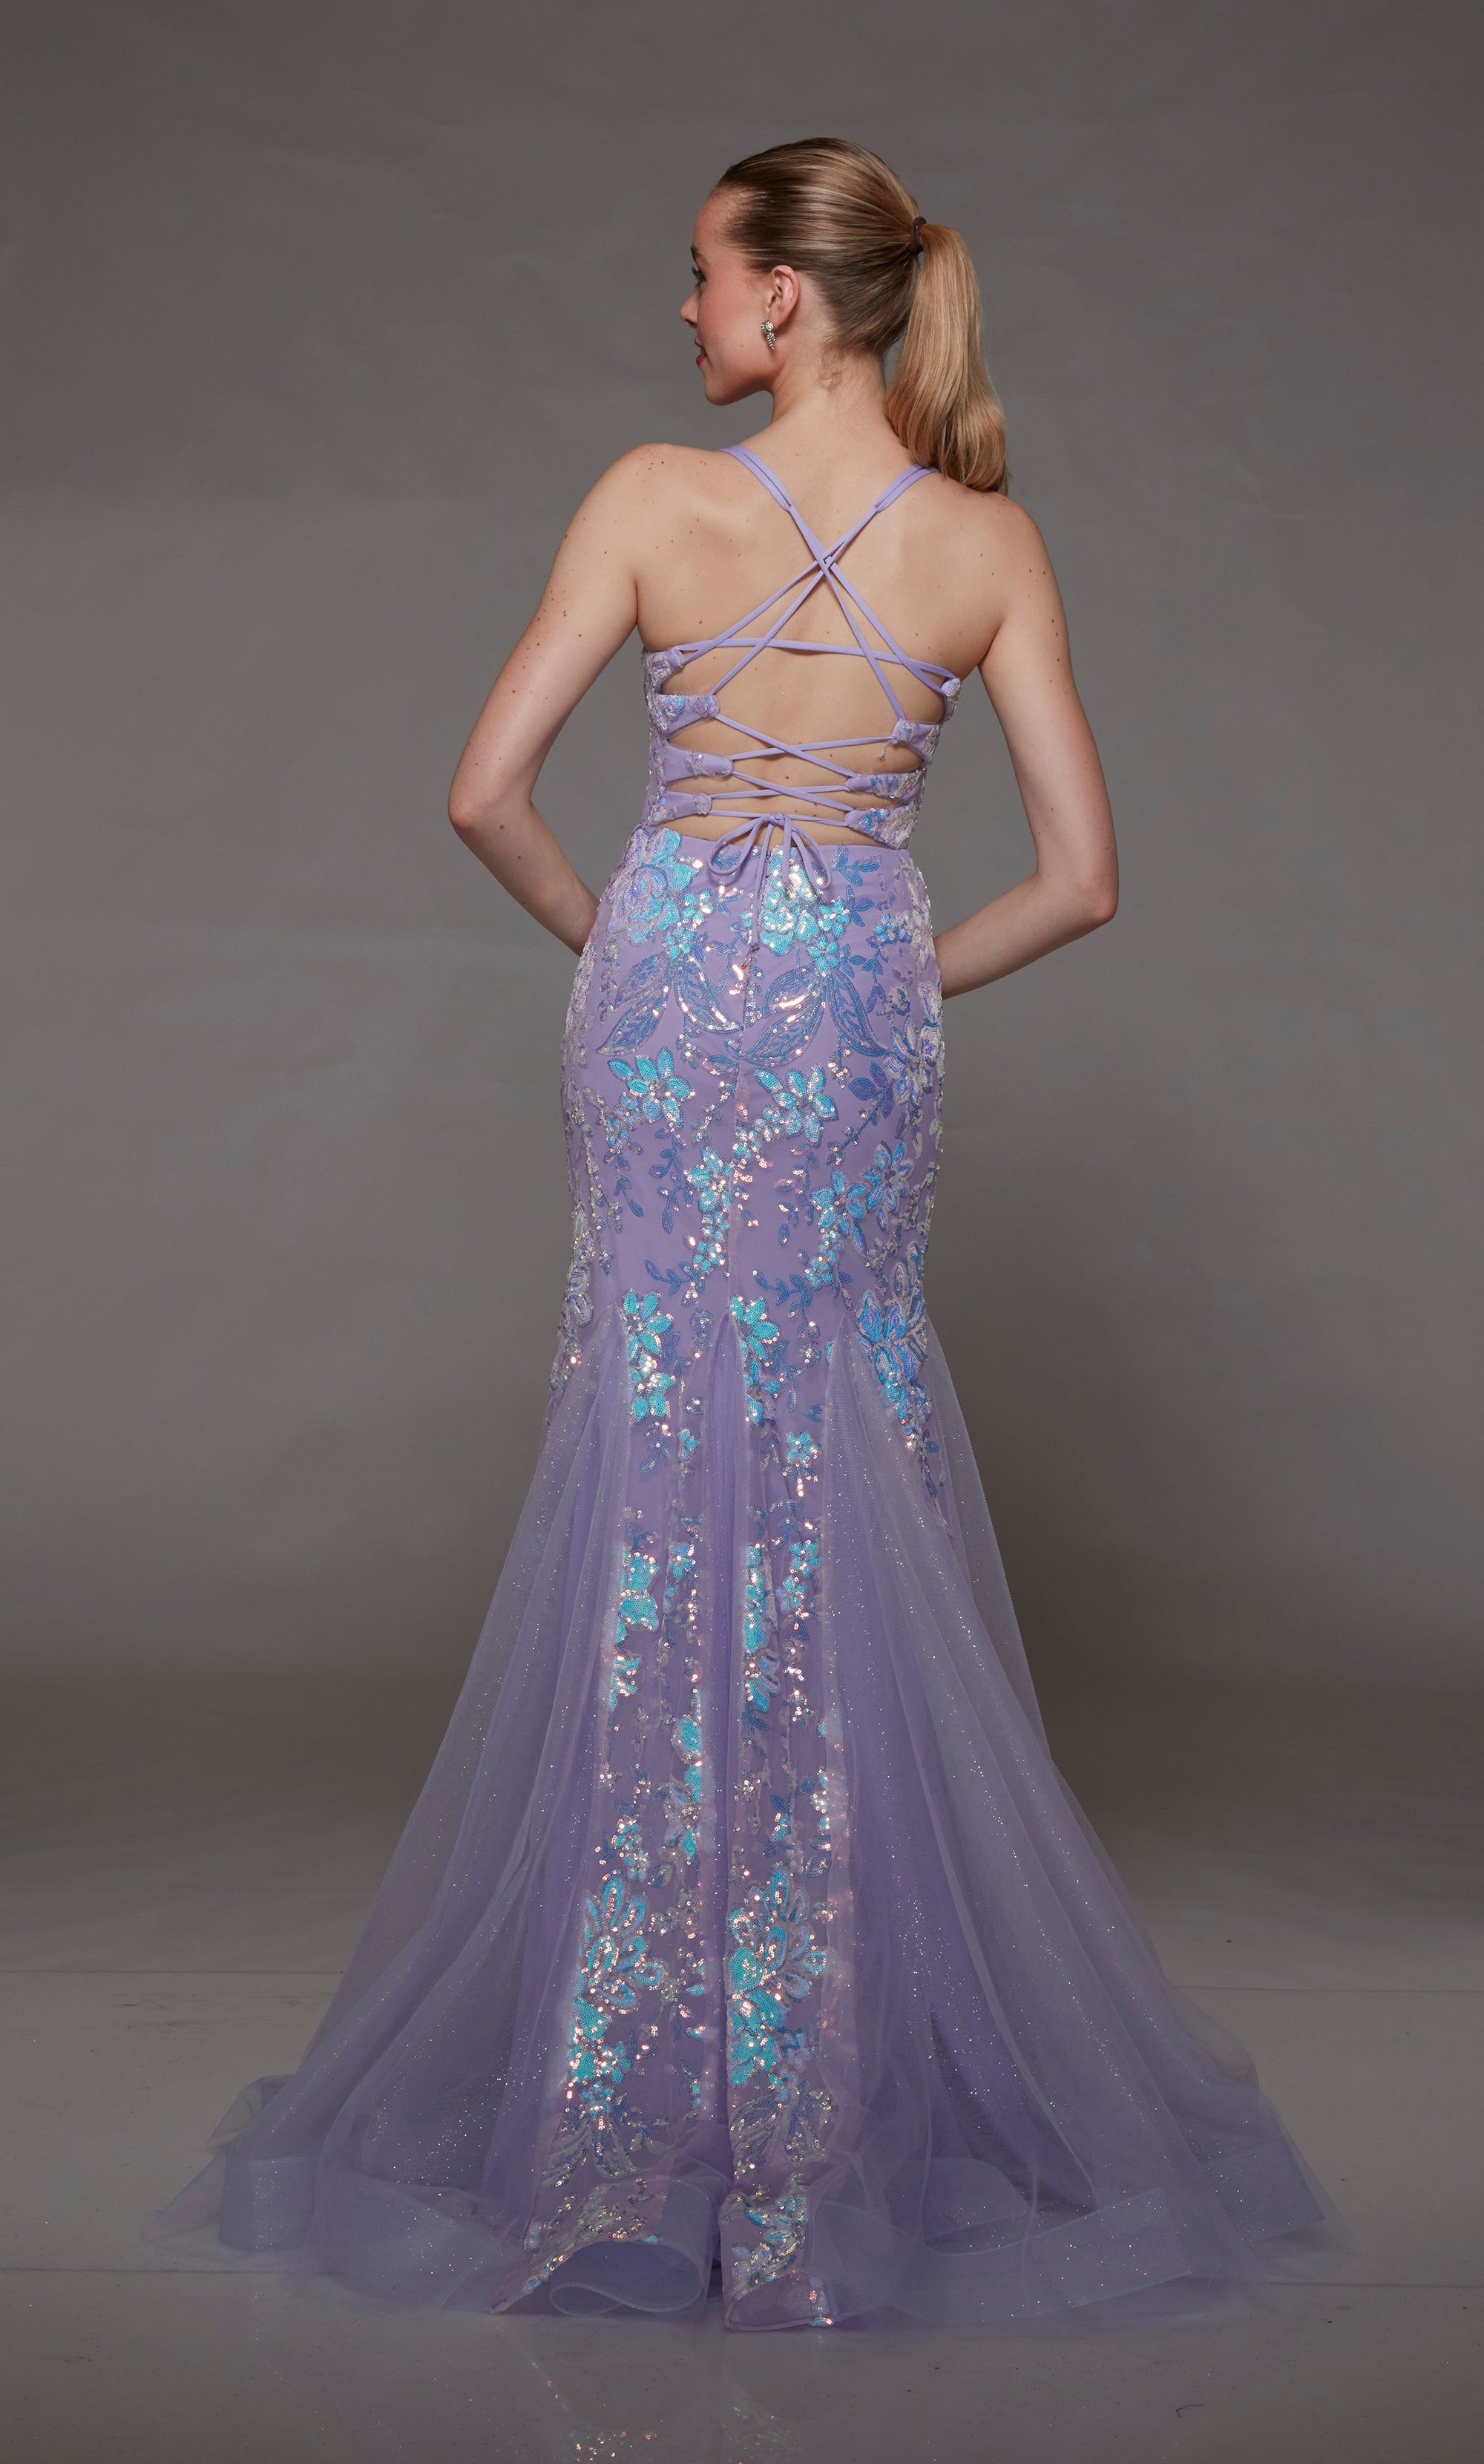 Lilac purple mermaid dress featuring an plunging neckline, iridescent sequin flowers, and an strappy open back for an chic and enchanting look.